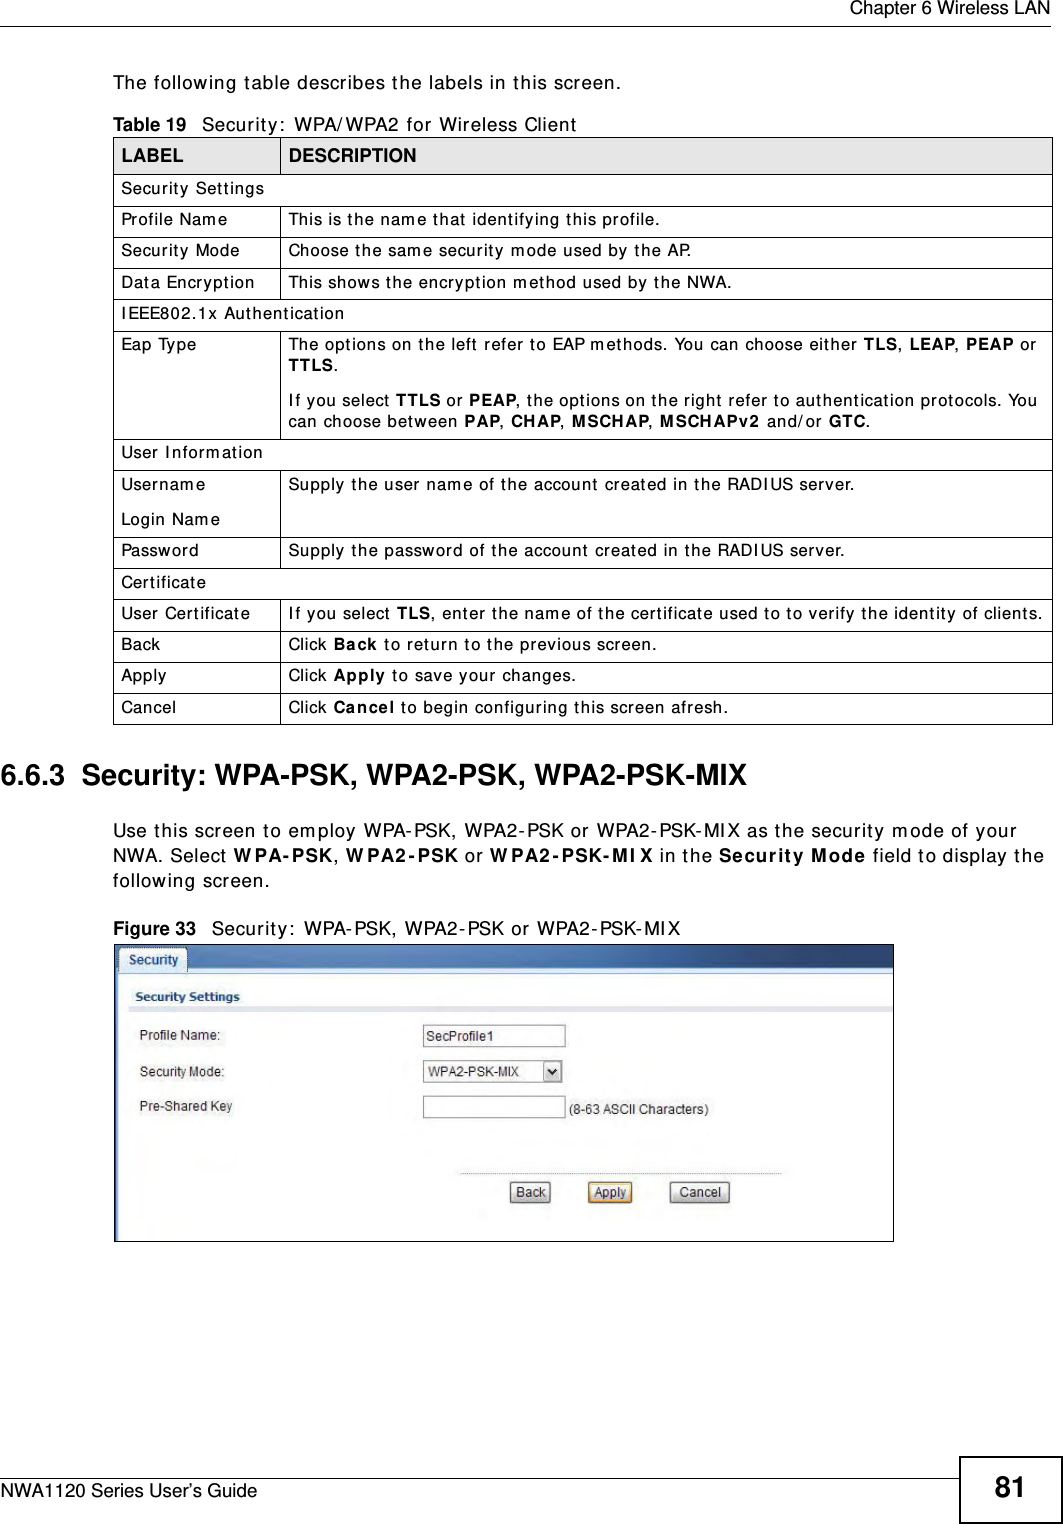  Chapter 6 Wireless LANNWA1120 Series User’s Guide 81The following table describes the labels in this screen.6.6.3  Security: WPA-PSK, WPA2-PSK, WPA2-PSK-MIXUse this screen to employ WPA-PSK, WPA2-PSK or WPA2-PSK-MIX as the security mode of your NWA. Select WPA-PSK, WPA2-PSK or WPA2-PSK-MIX in the Security Mode field to display the following screen.Figure 33   Security: WPA-PSK, WPA2-PSK or WPA2-PSK-MIXTable 19   Security: WPA/WPA2 for Wireless ClientLABEL DESCRIPTIONSecurity SettingsProfile Name This is the name that identifying this profile.Security Mode Choose the same security mode used by the AP.Data Encryption This shows the encryption method used by the NWA.IEEE802.1x AuthenticationEap Type The options on the left refer to EAP methods. You can choose either TLS, LEAP, PEAP or TTLS. If you select TTLS or PEAP, the options on the right refer to authentication protocols. You can choose between PAP, CHAP, MSCHAP, MSCHAPv2 and/or GTC.User InformationUsernameLogin NameSupply the user name of the account created in the RADIUS server.Password Supply the password of the account created in the RADIUS server.CertificateUser Certificate If you select TLS, enter the name of the certificate used to to verify the identity of clients.Back Click Back to return to the previous screen.Apply Click Apply to save your changes.Cancel Click Cancel to begin configuring this screen afresh.